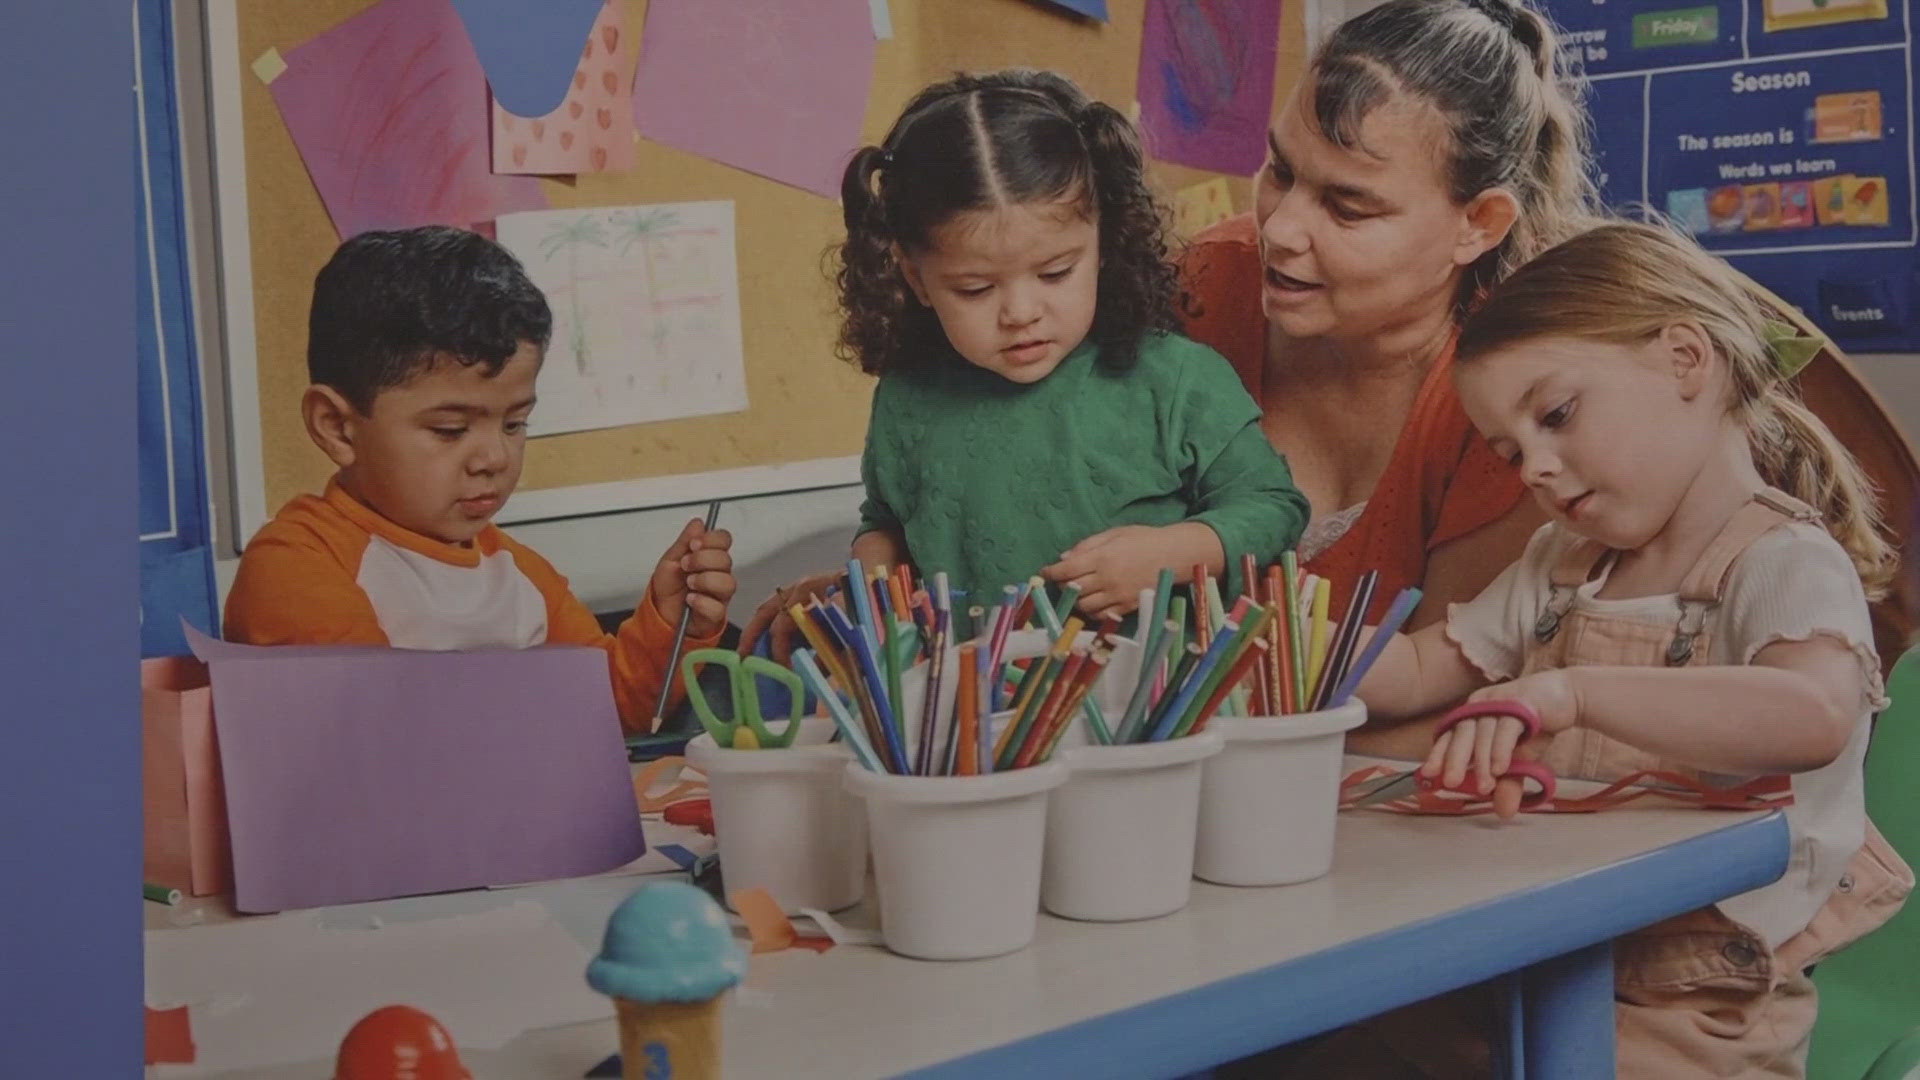 Arizona's Department of Economic Security's Division of Child Care says there's been a decrease in the number of providers caring for children out of their home.